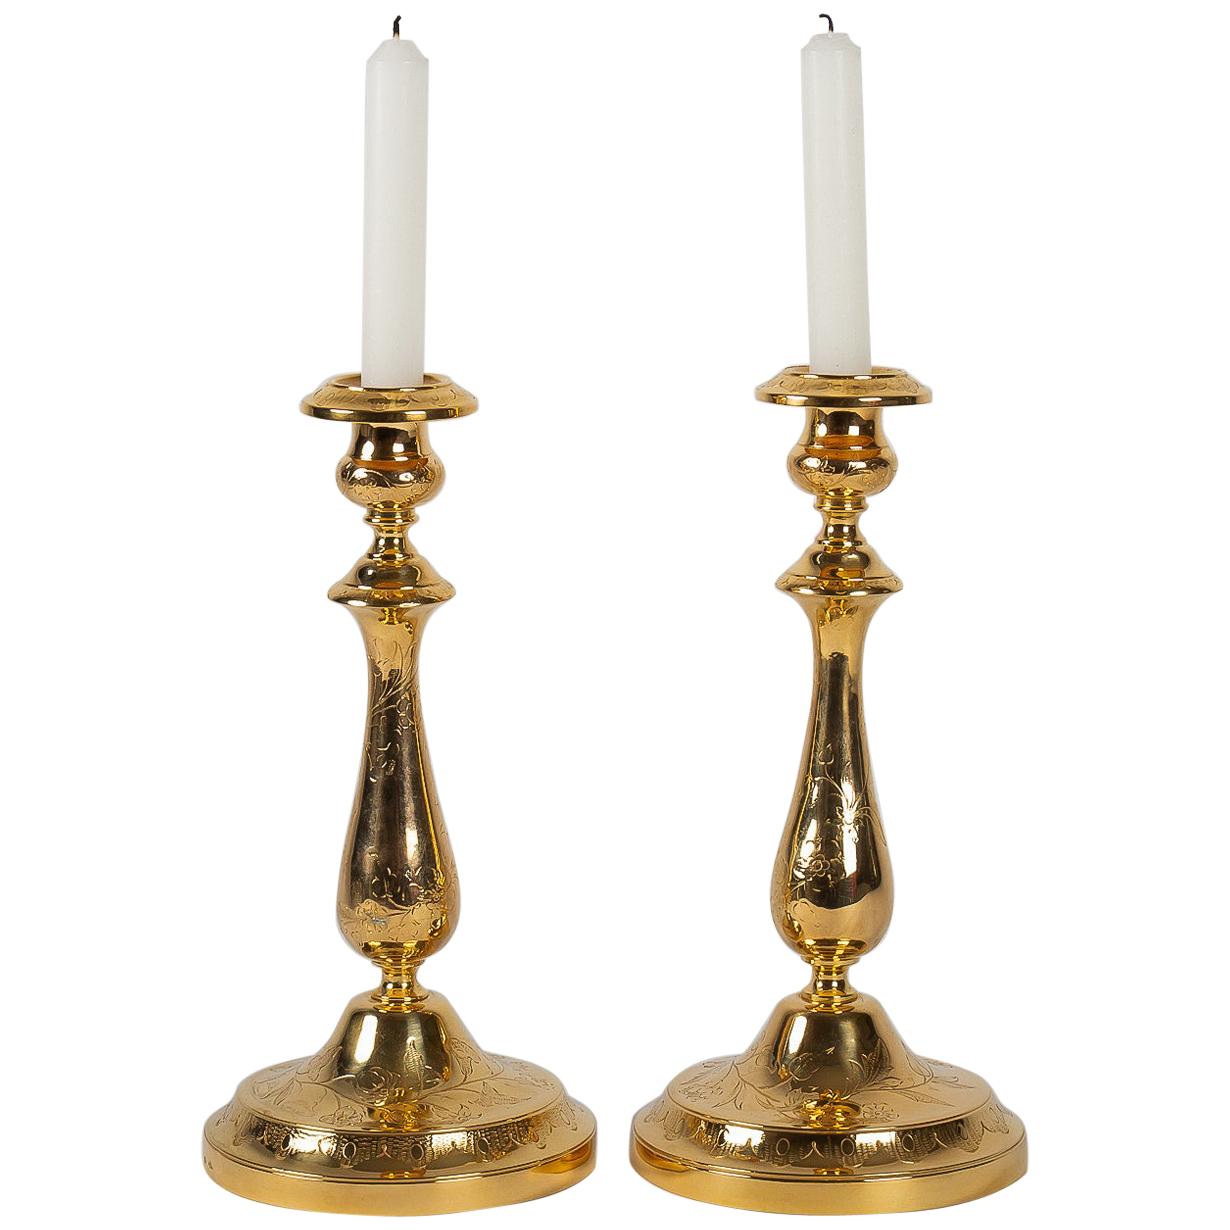 Maison Christofle, 19th-Century Pair of Silvered and Gilted Metal Candlesticks For Sale